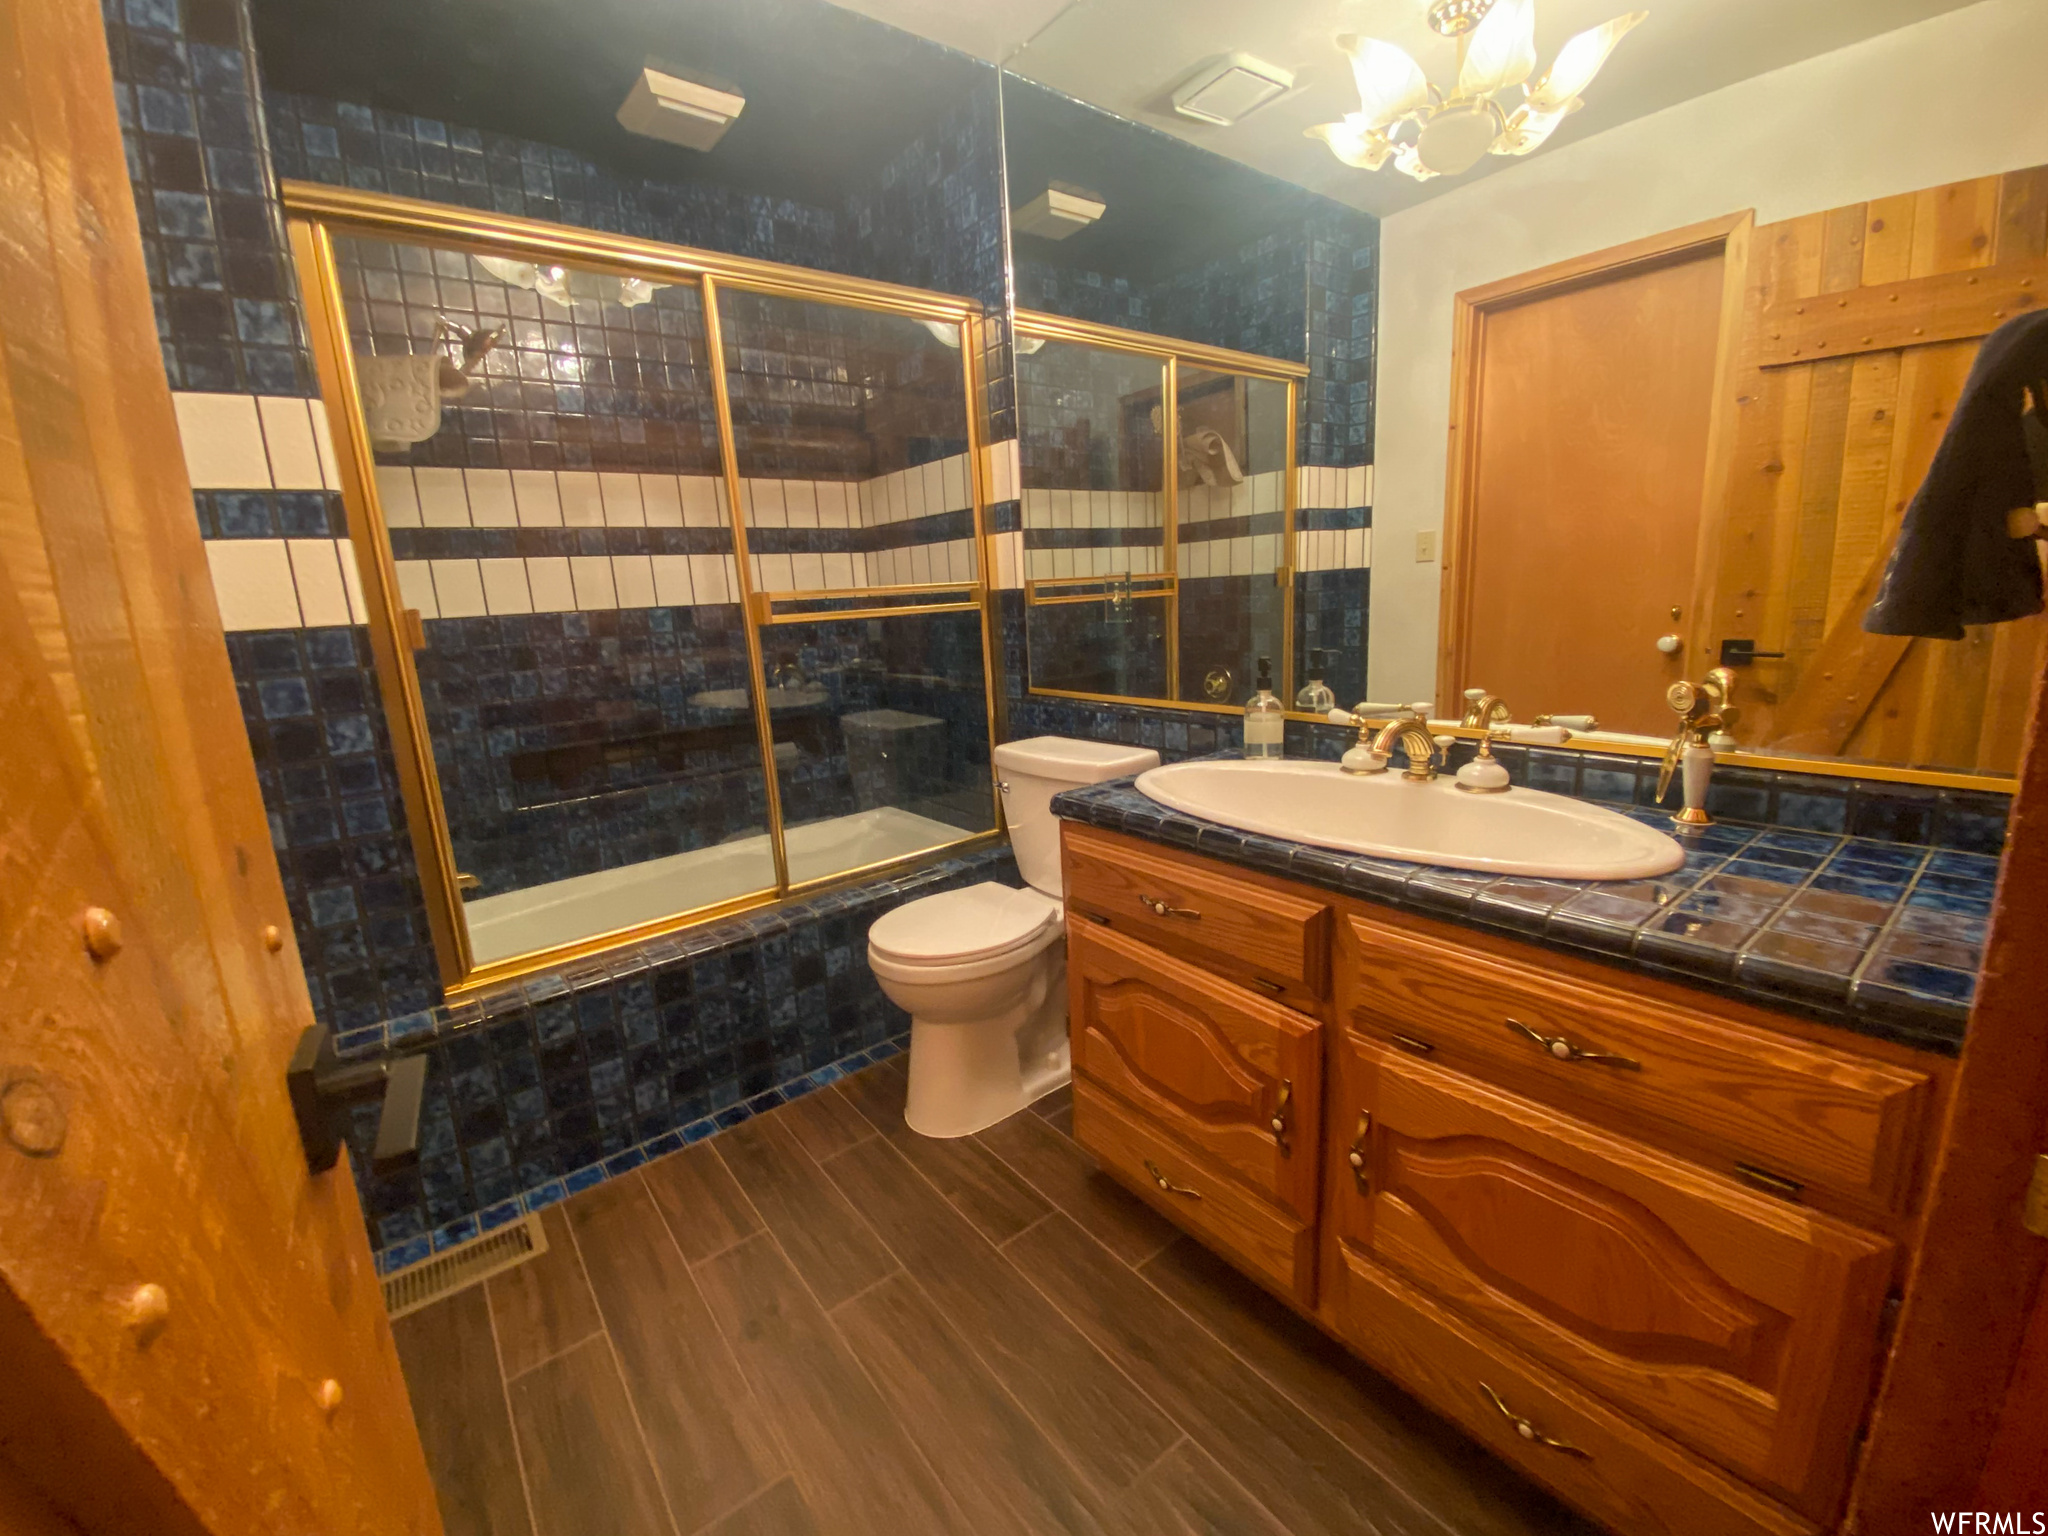 Full bathroom with vanity, a chandelier, toilet, combined bath / shower with glass door, and wood walls